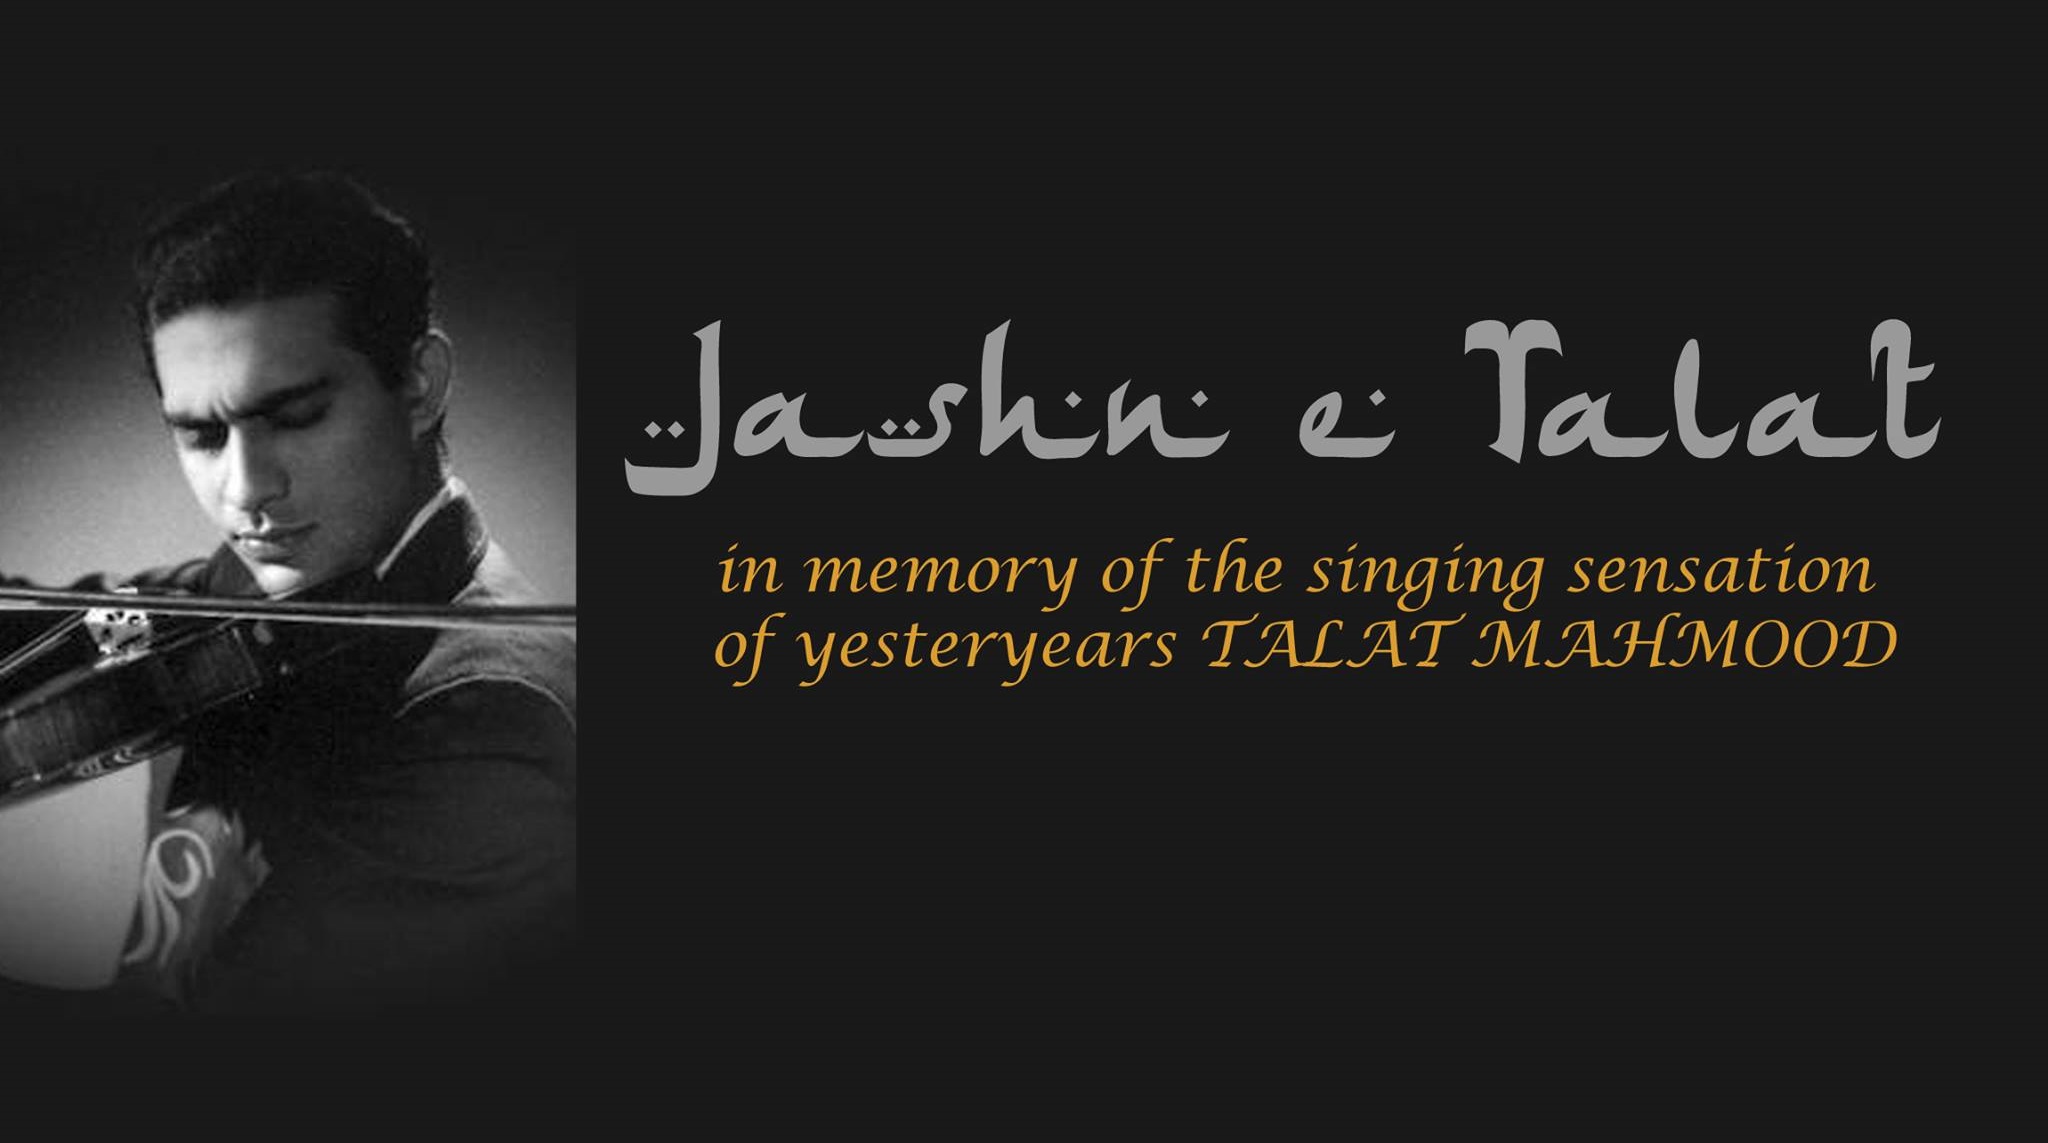 Talat Mahmood’s melodies to be re-introduced